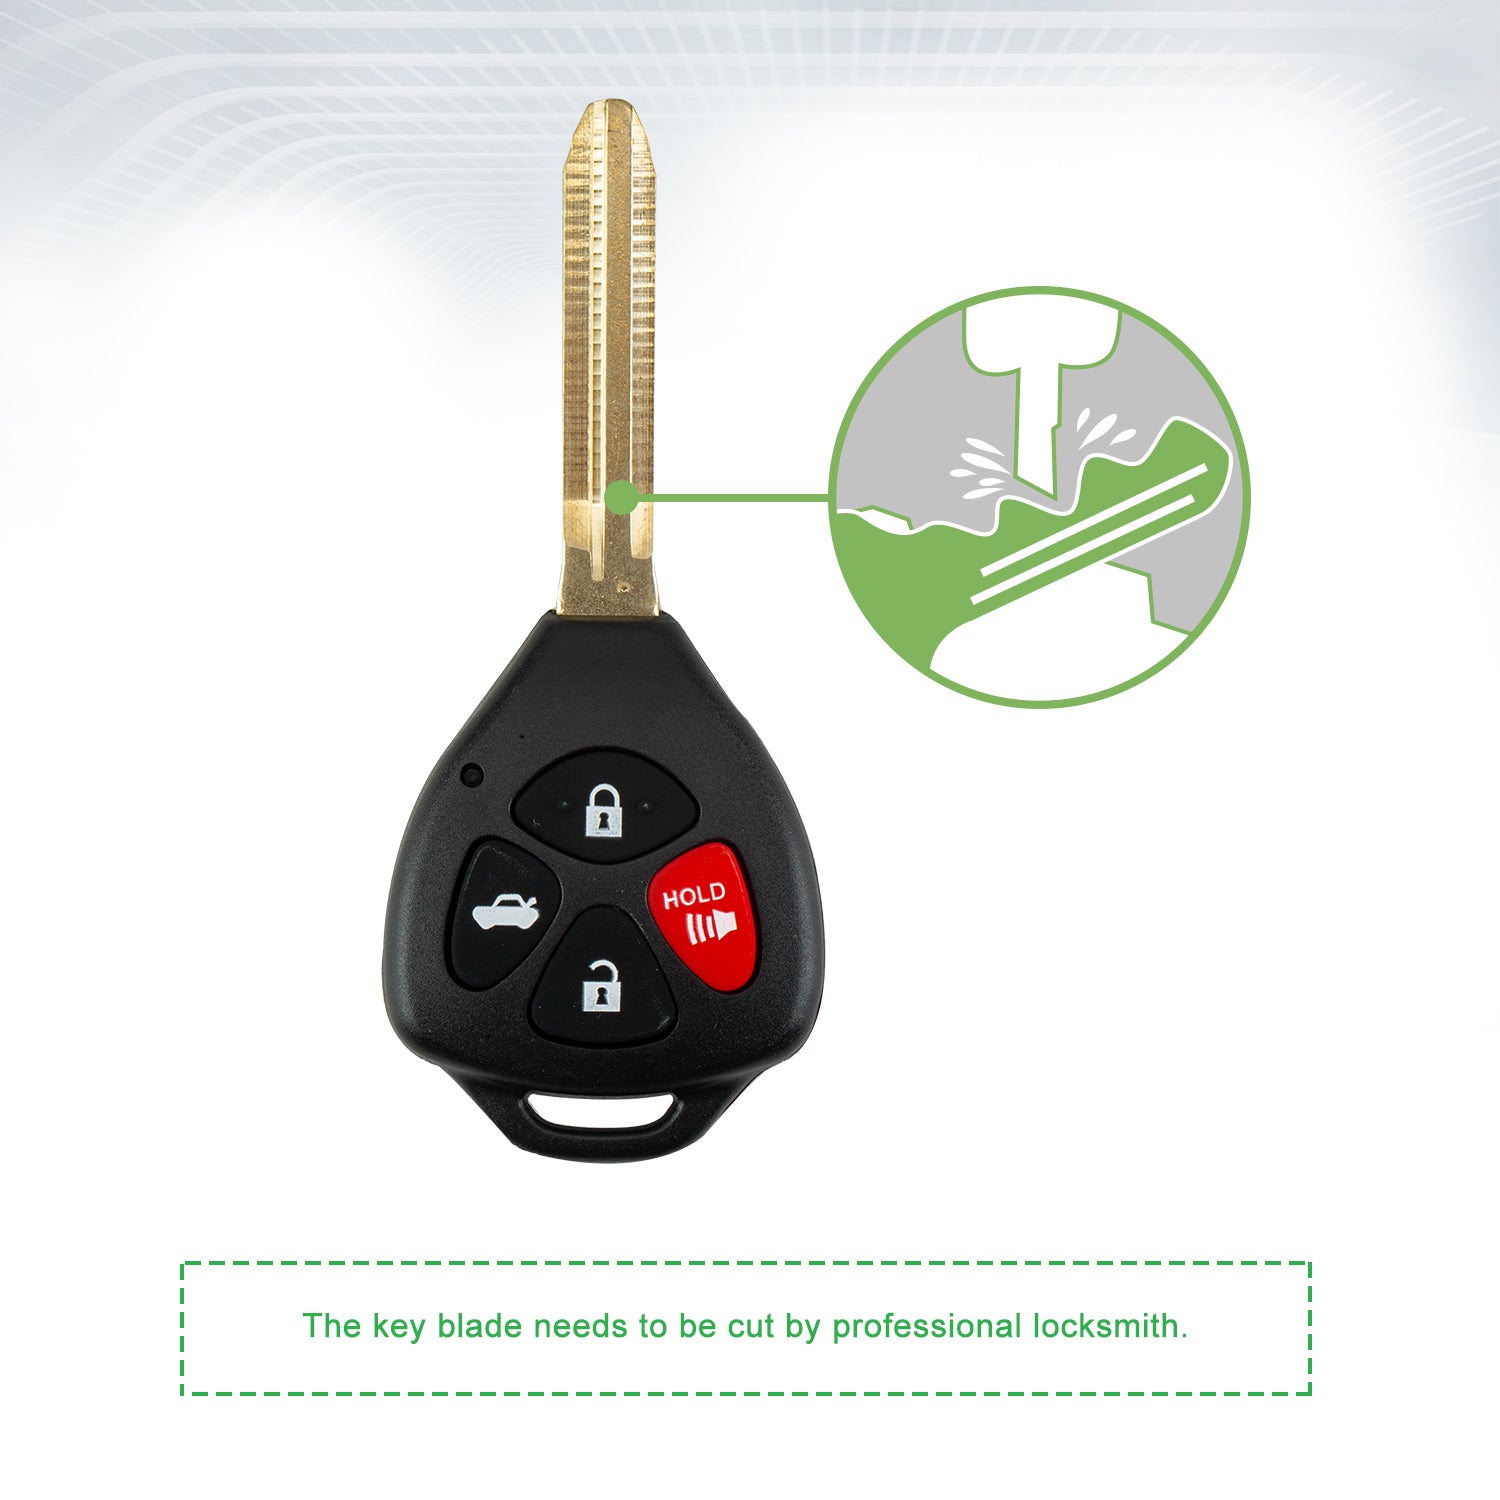 Lots of 10 Keyless Remote Car Key Fob Replacement for Toyota 2007-2010 Camry 4 Buttons HYQ12BBY 89070-06232